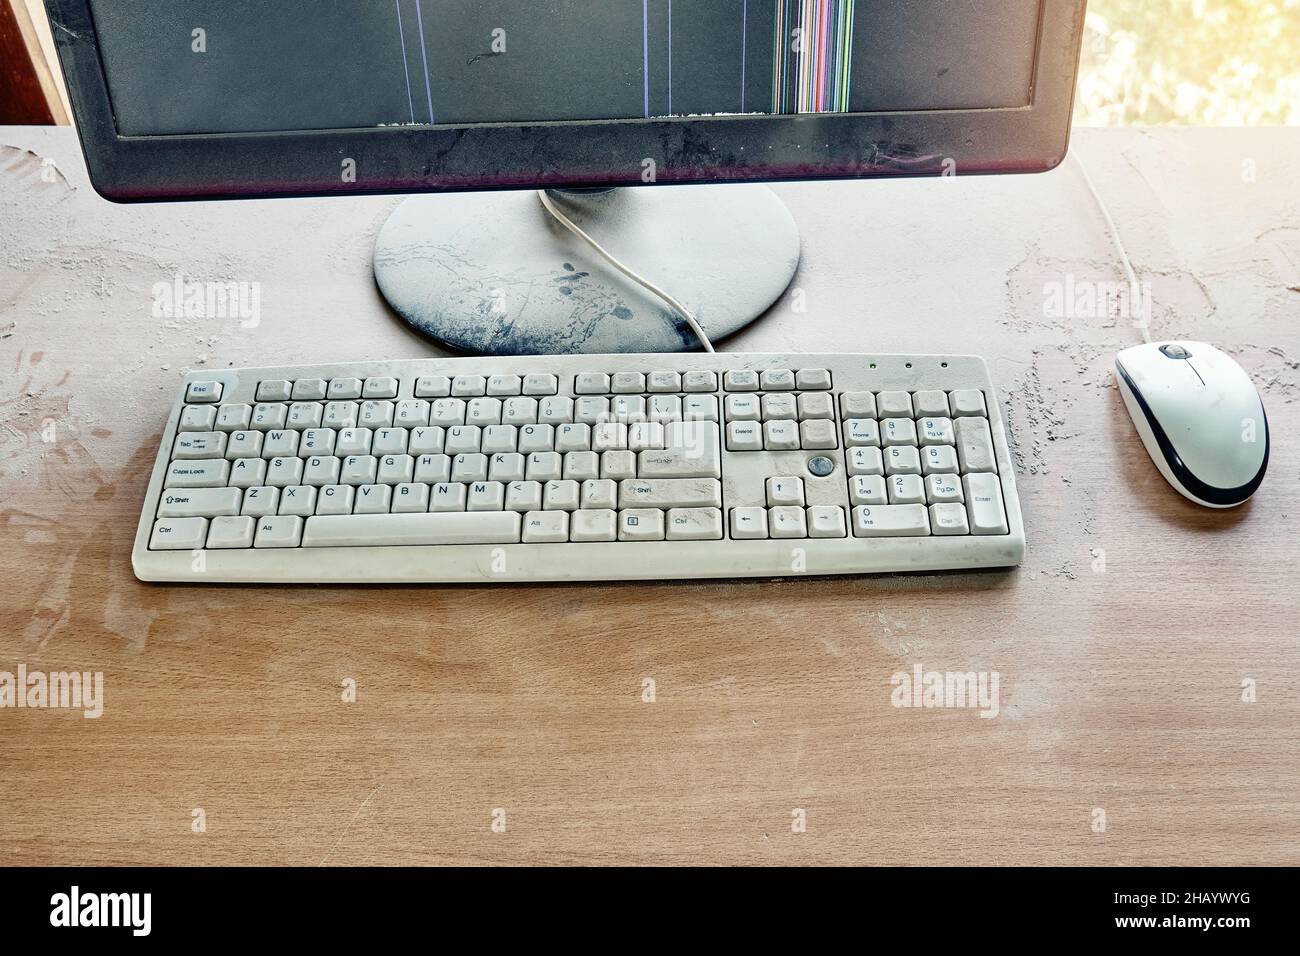 Old keyboard with mouse and broken monitor are on wooden table and covered in thick dust in a workshop. Top view Stock Photo